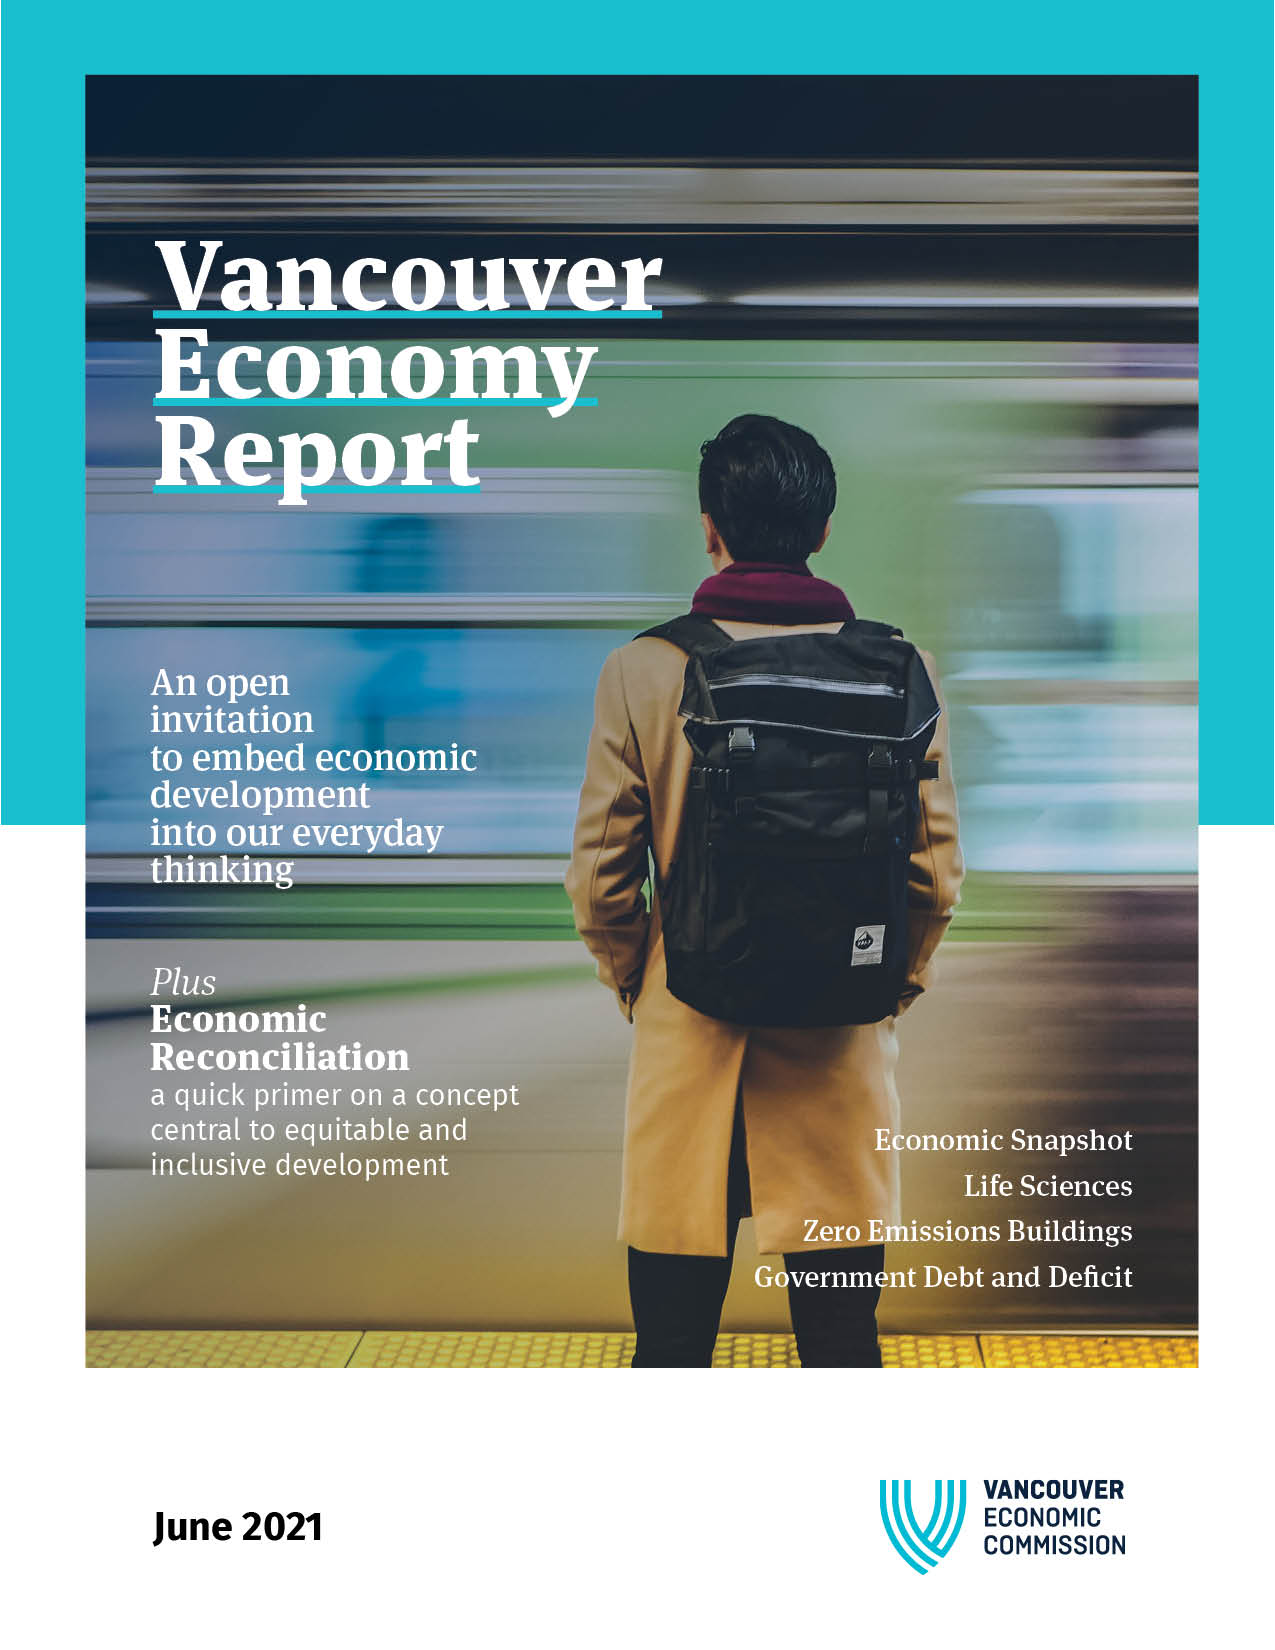 Front cover of the Summer 2021 Vancouver Economy Report